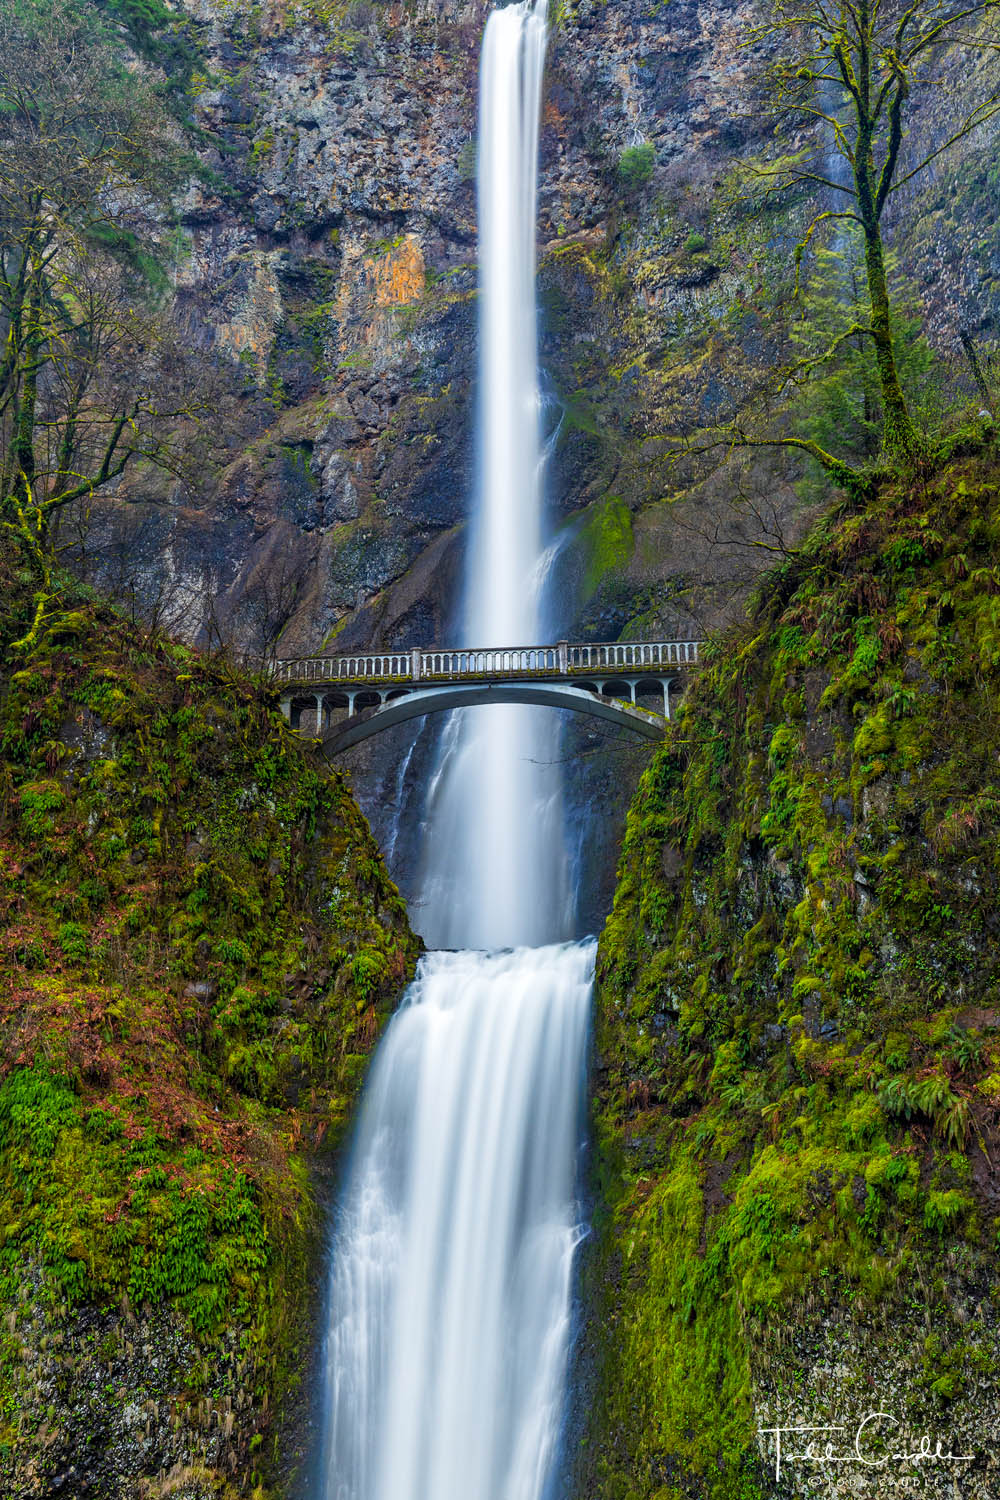 Multnomah Falls drops over 600 feet over the edge of a cliff to create America's second-highest perennial waterfall.